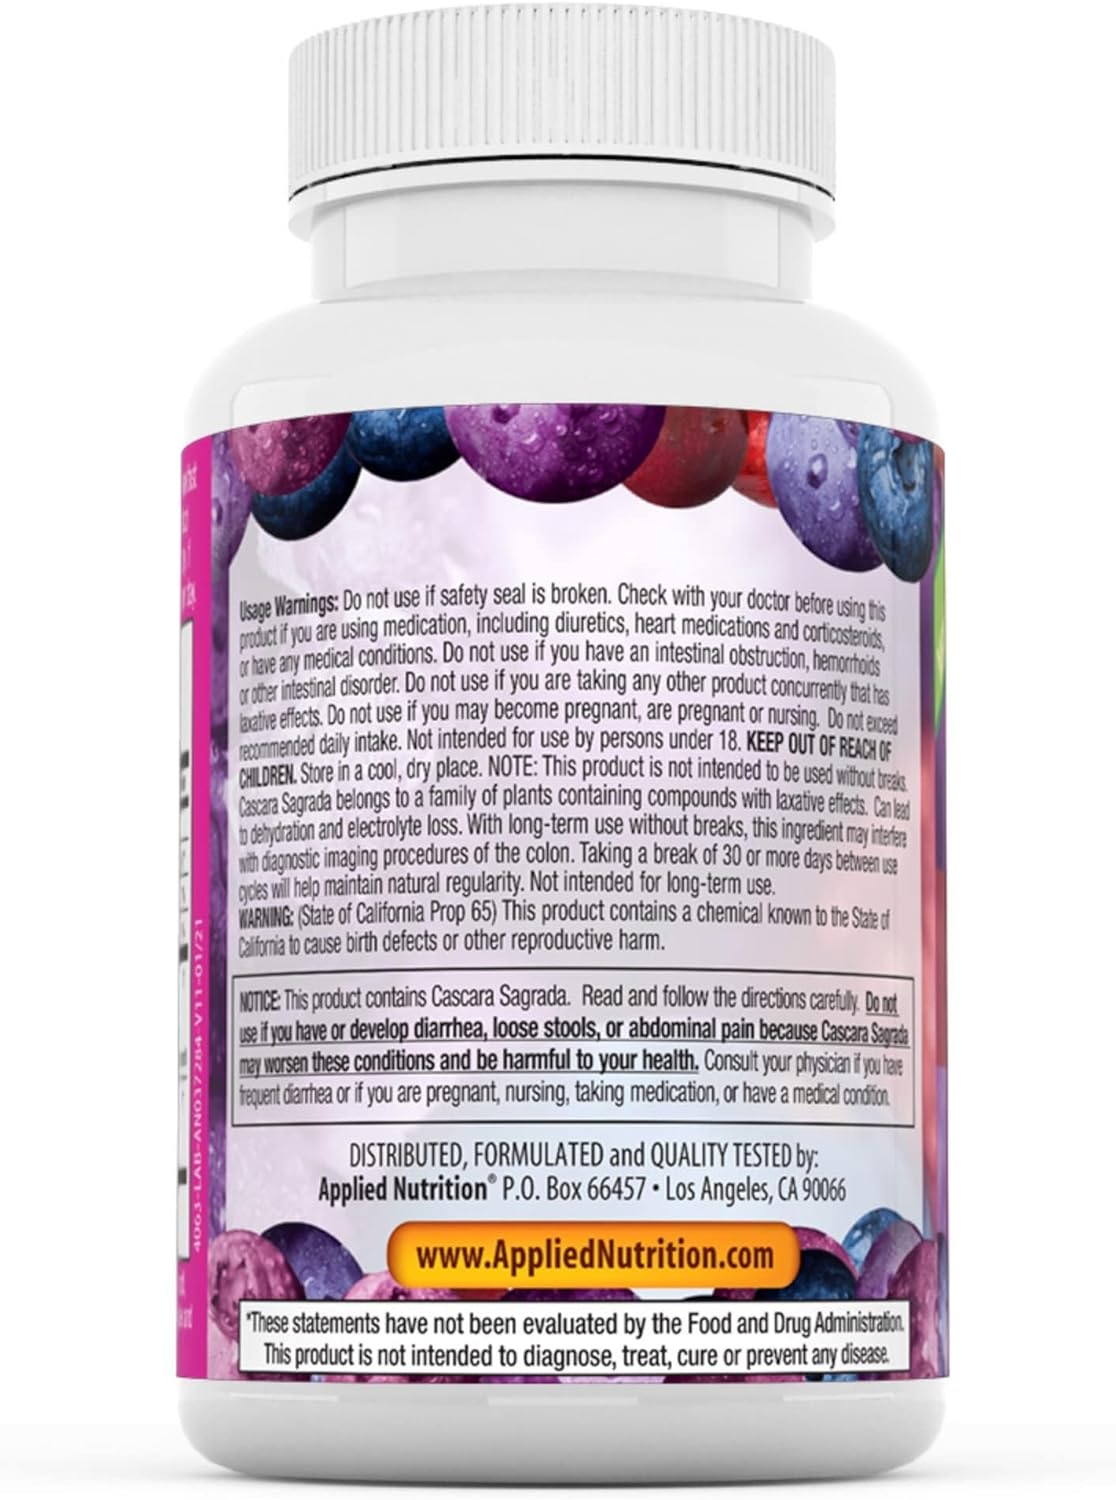 appliednutrition 14-Day Acai Berry Cleanse (56 Tablets)